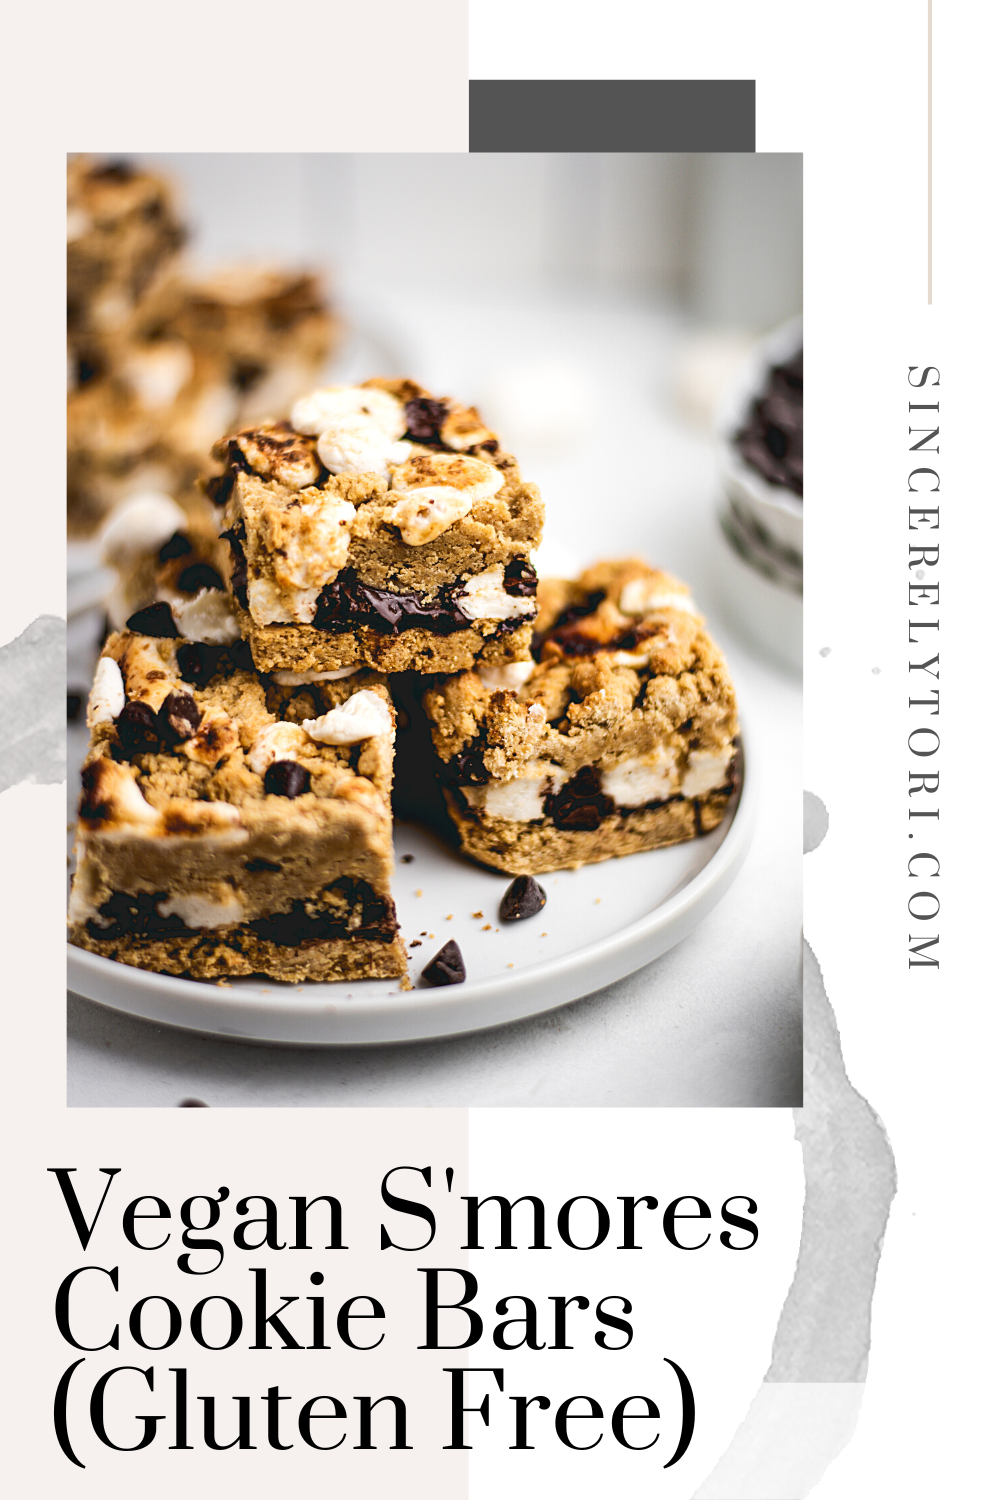 How to make vegan s'mores cookie bars